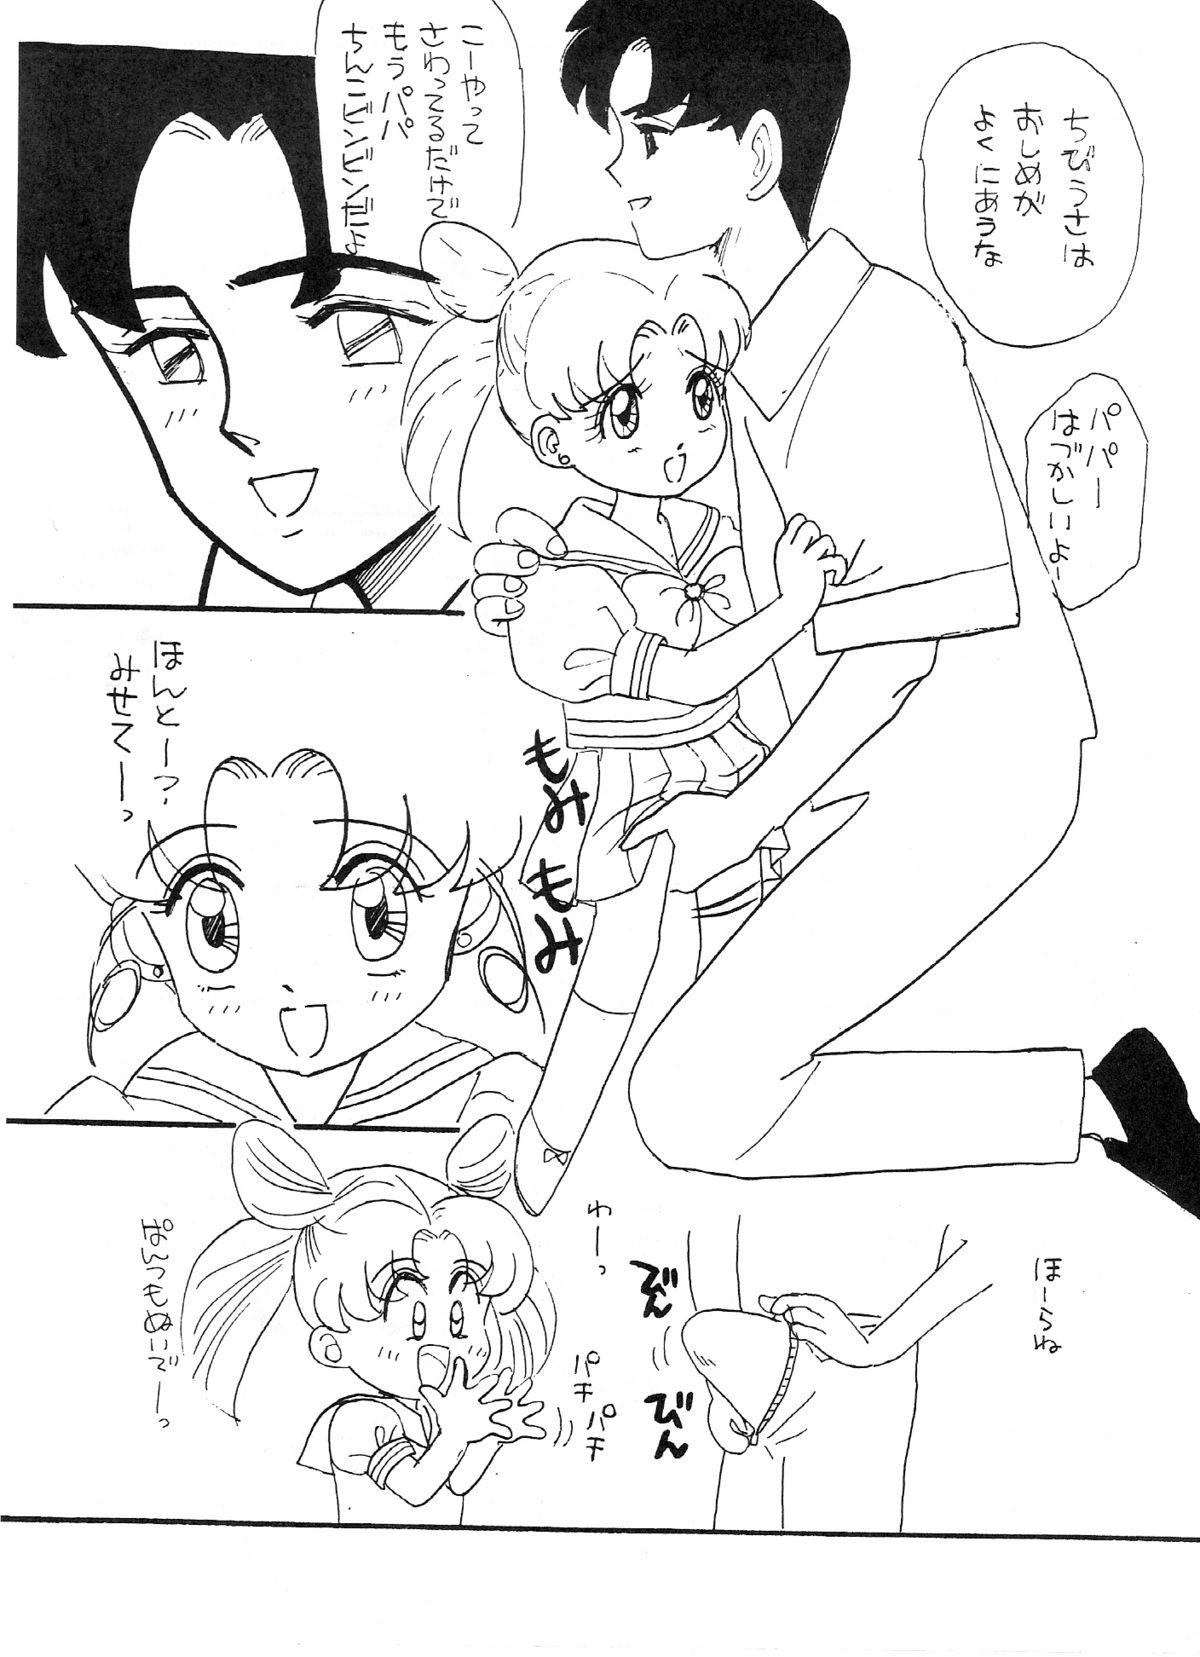 Dick Suck SW-α - Sailor moon Tits - Page 8